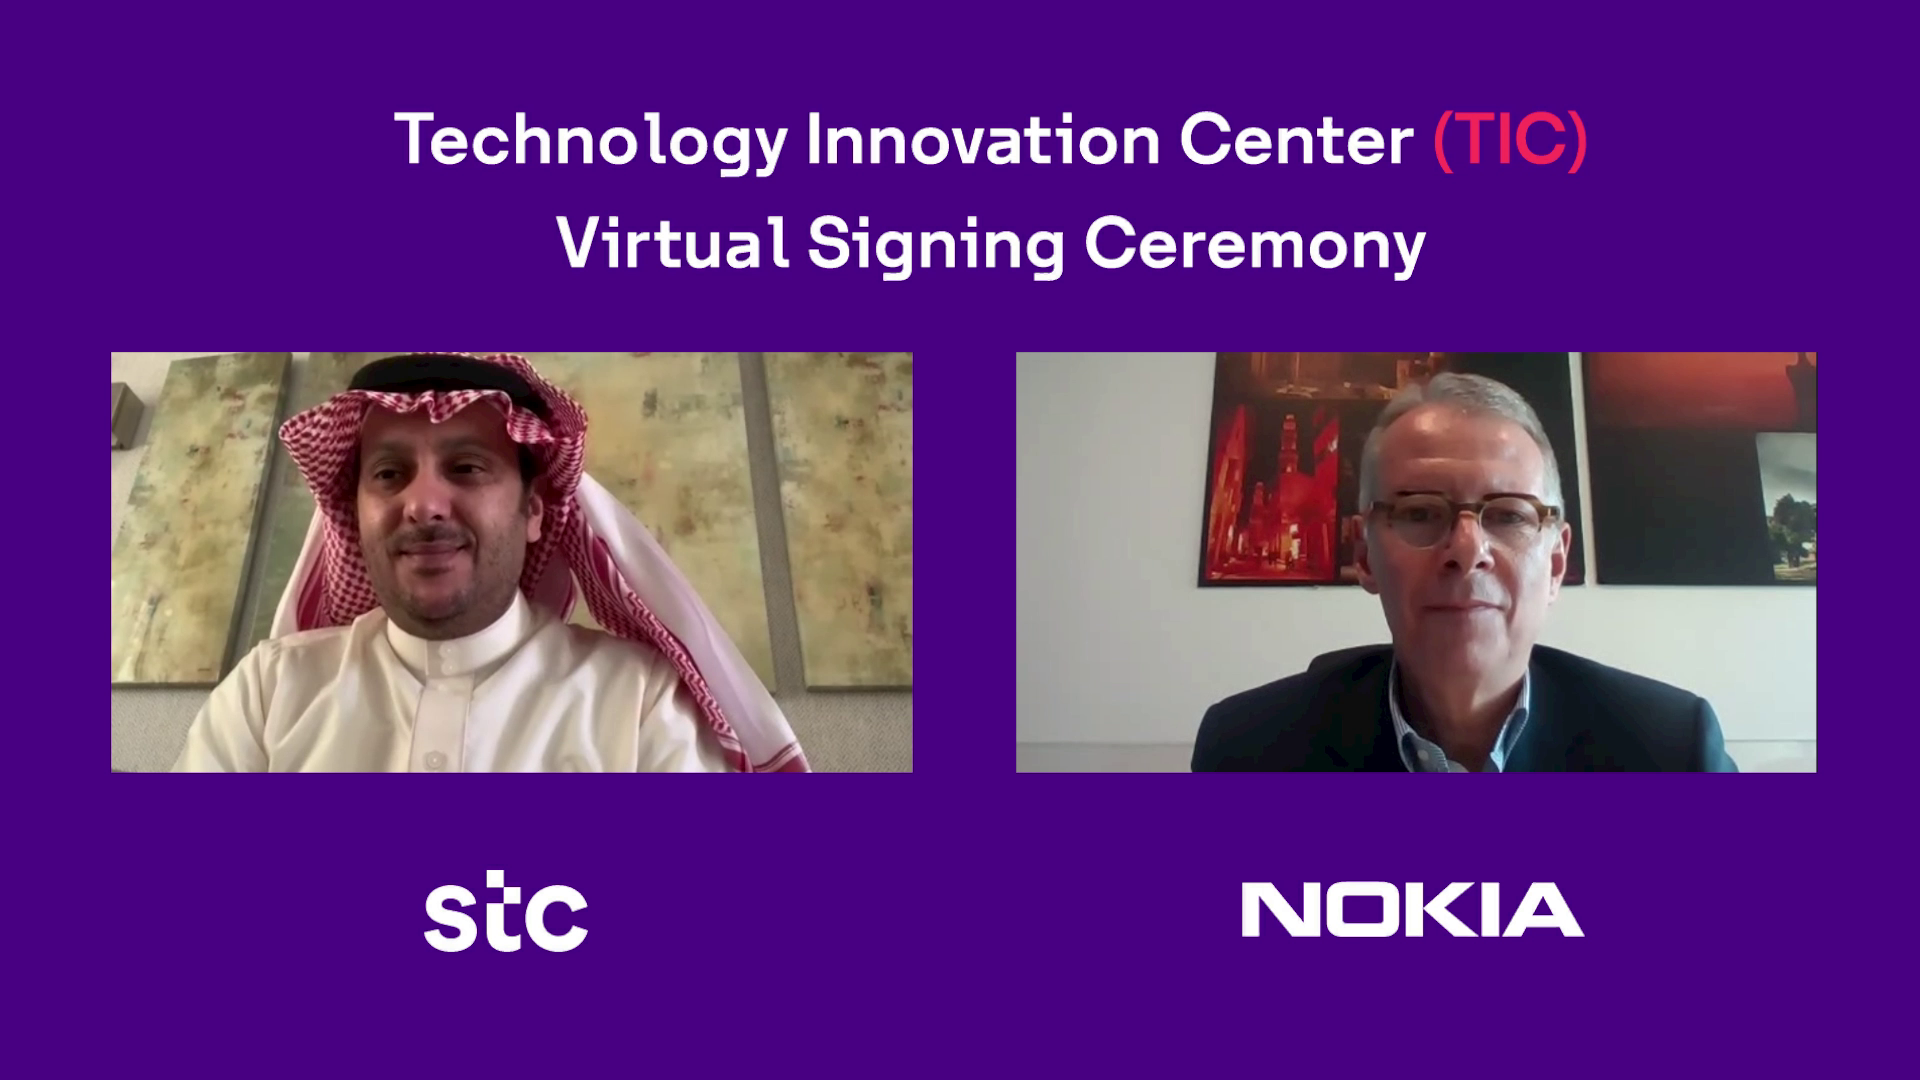 Image for Nokia And stc Launch The Operation Of Technology Innovation Center To Stimulate Innovation